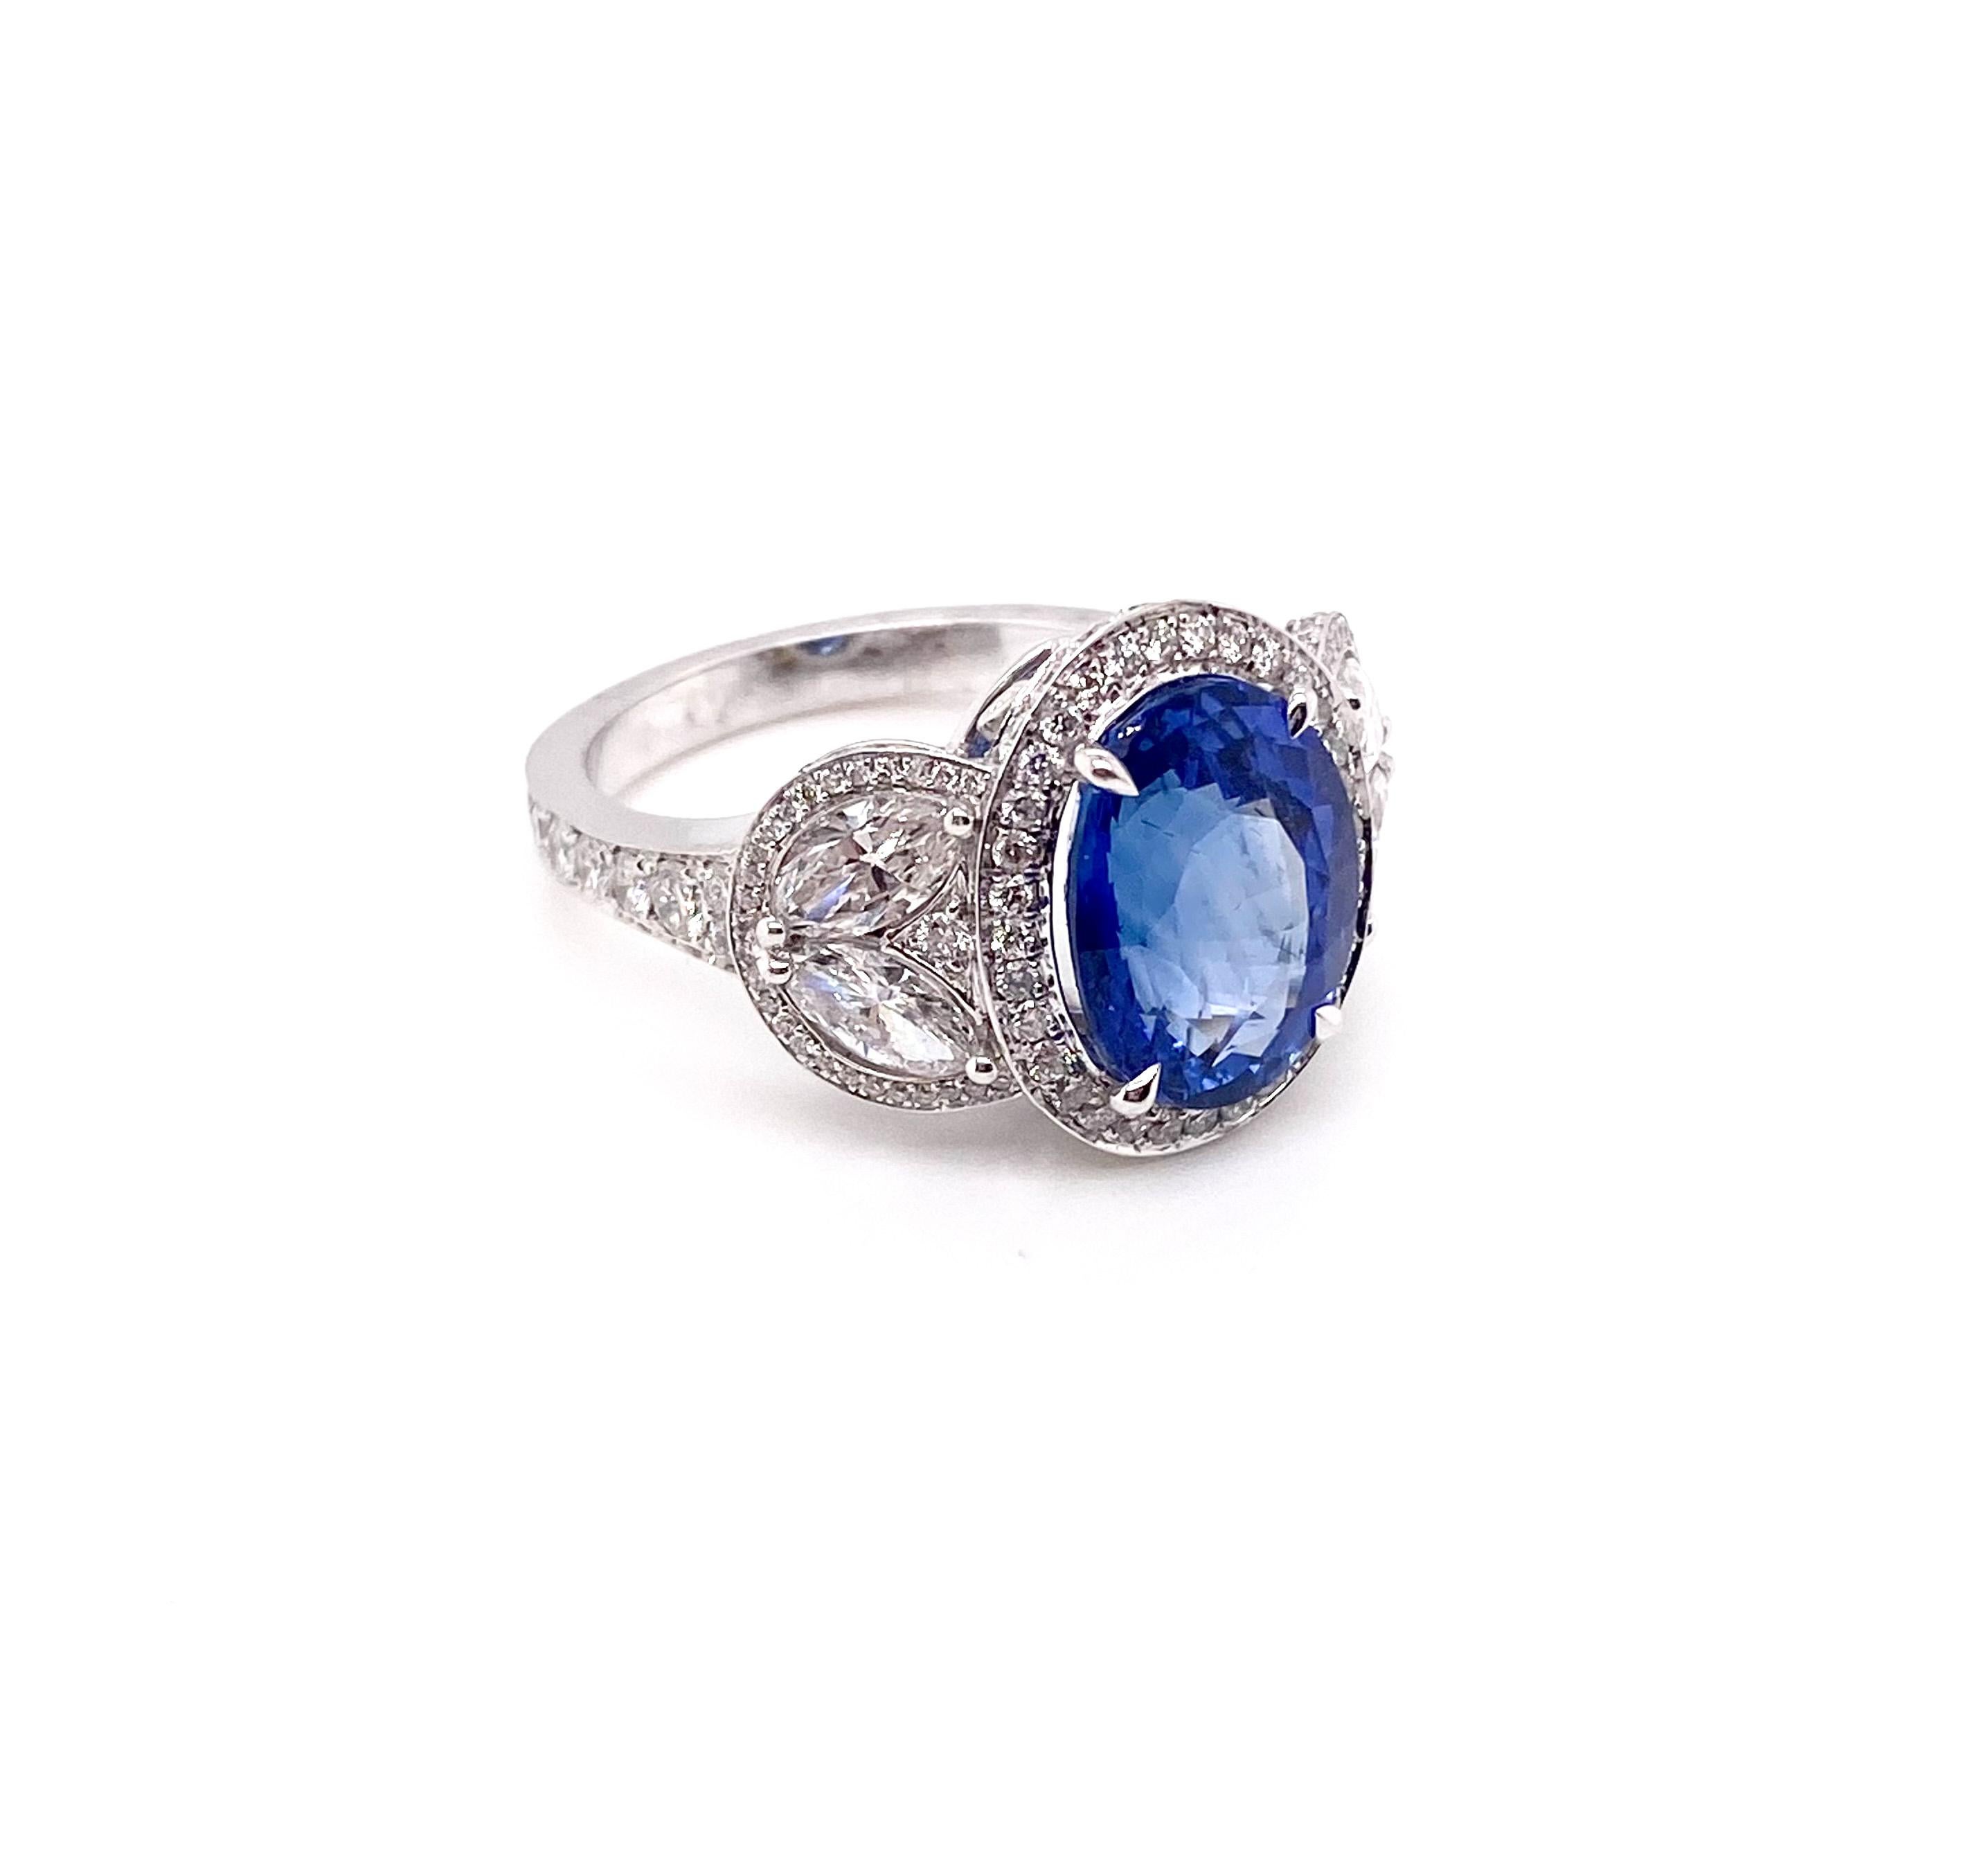 Luxuriously stylish in every way, this elegant sapphire gemstone ring is surrounded by a halo of brilliant round diamonds framed in 18K white gold. You don't need a special occasion to present it. You can wear every days and this ring is a